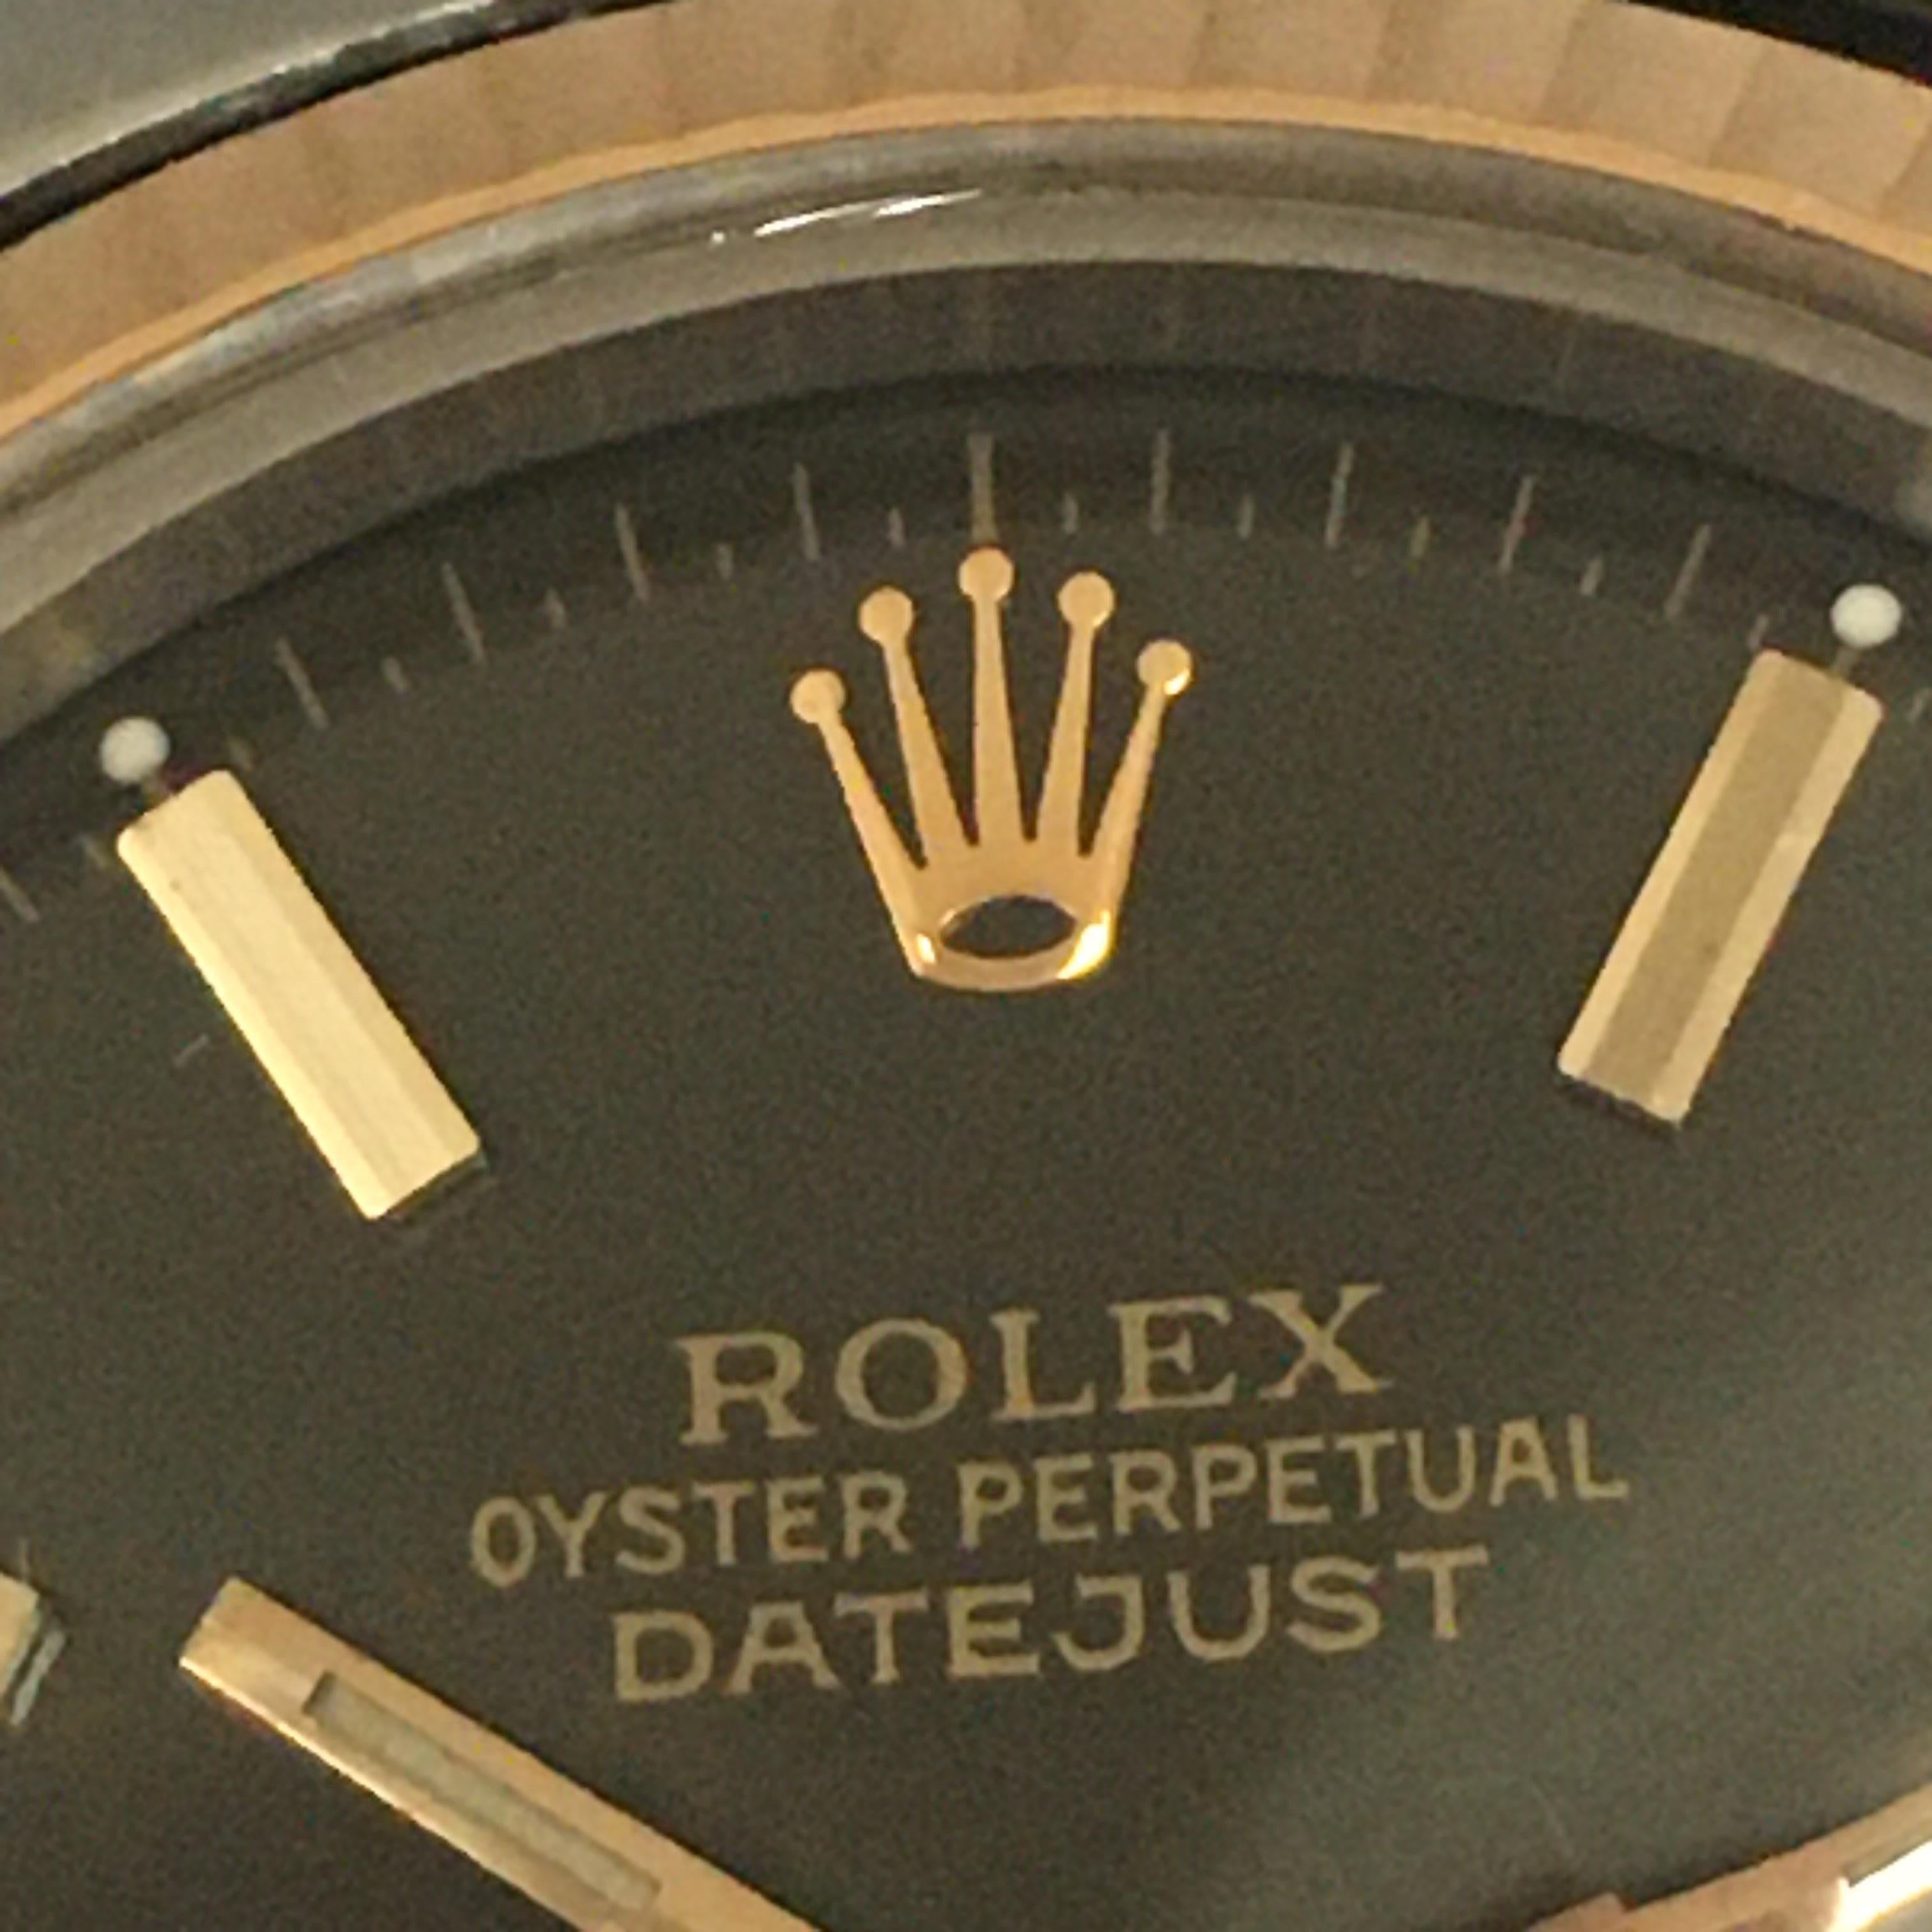 1974 Gent's Rolex Date Just Khanjar Black خنجر Dial 18K Two Tone Watch Ref 1603 In Fair Condition For Sale In Santa Monica, CA